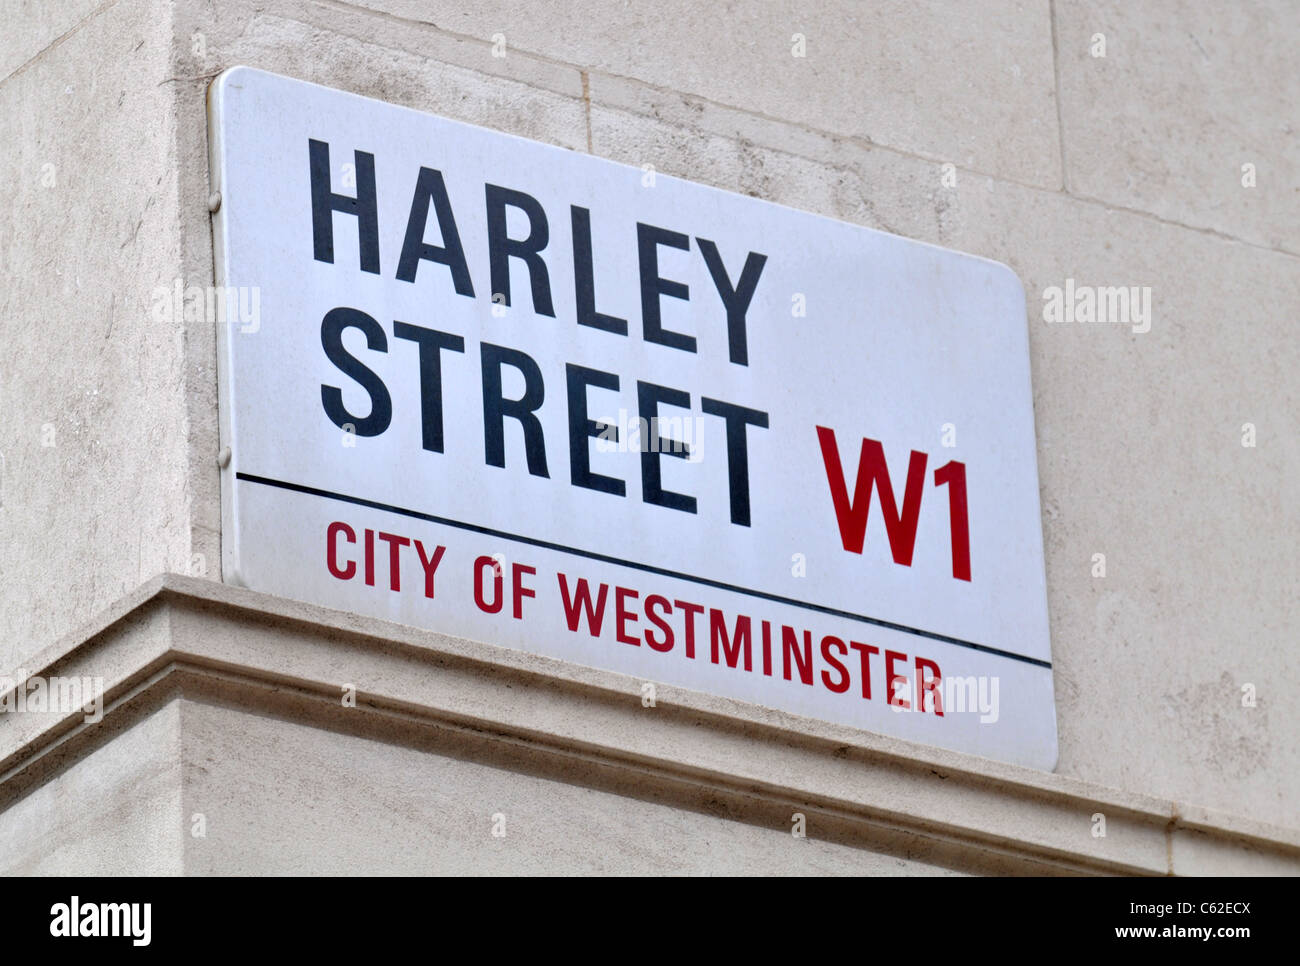 Harley Street sign, Londres, Angleterre, Royaume-Uni Banque D'Images